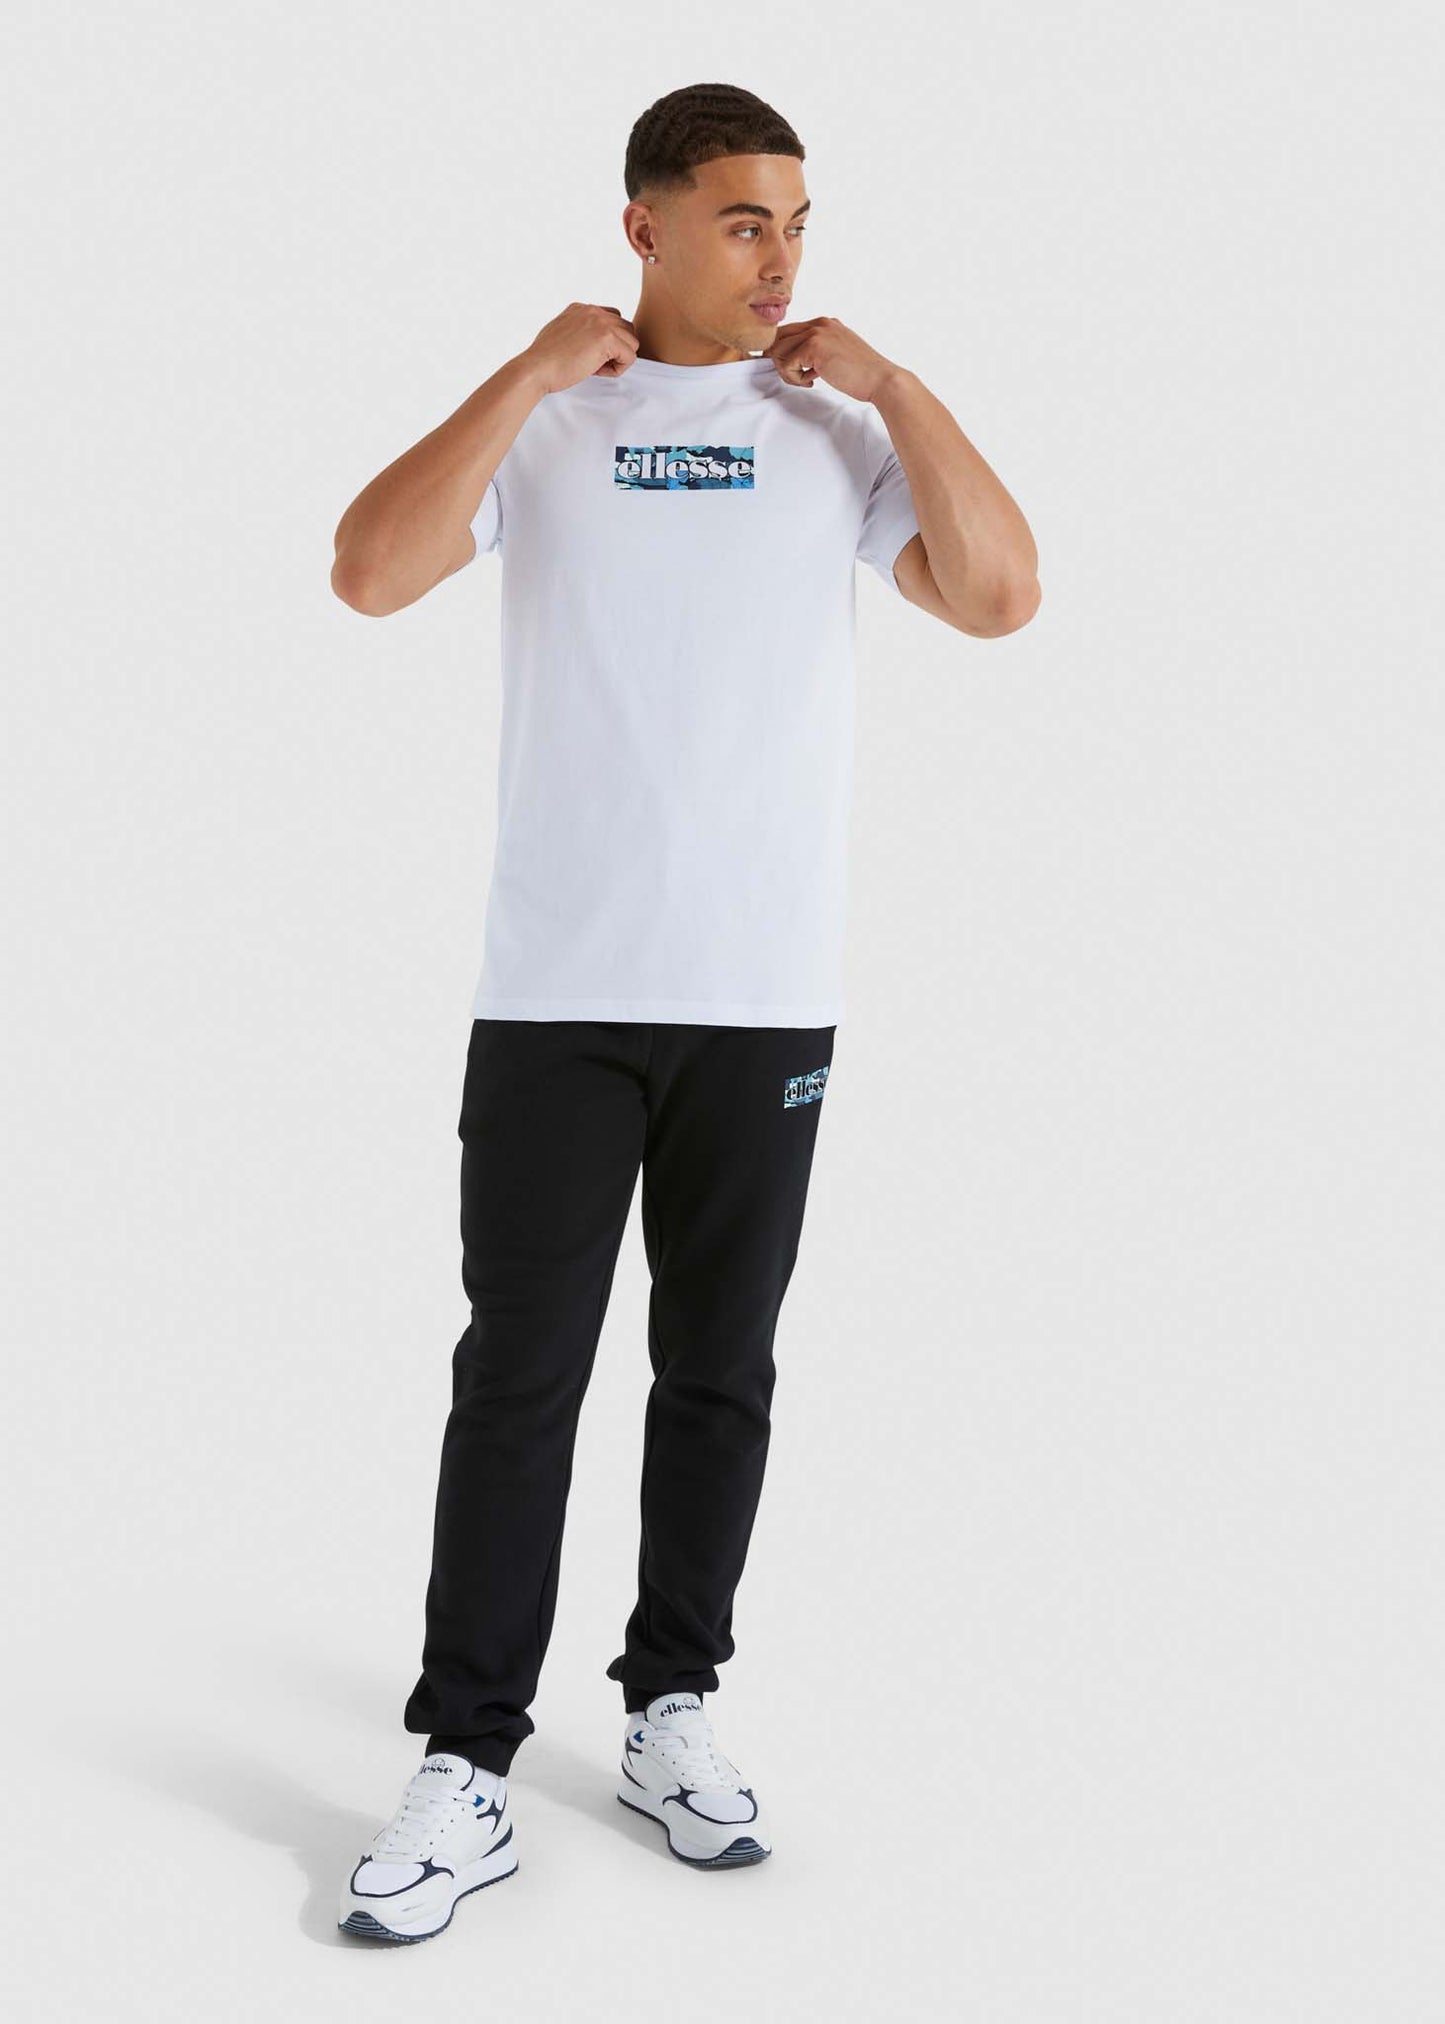 Ellesse t-shirt white with print